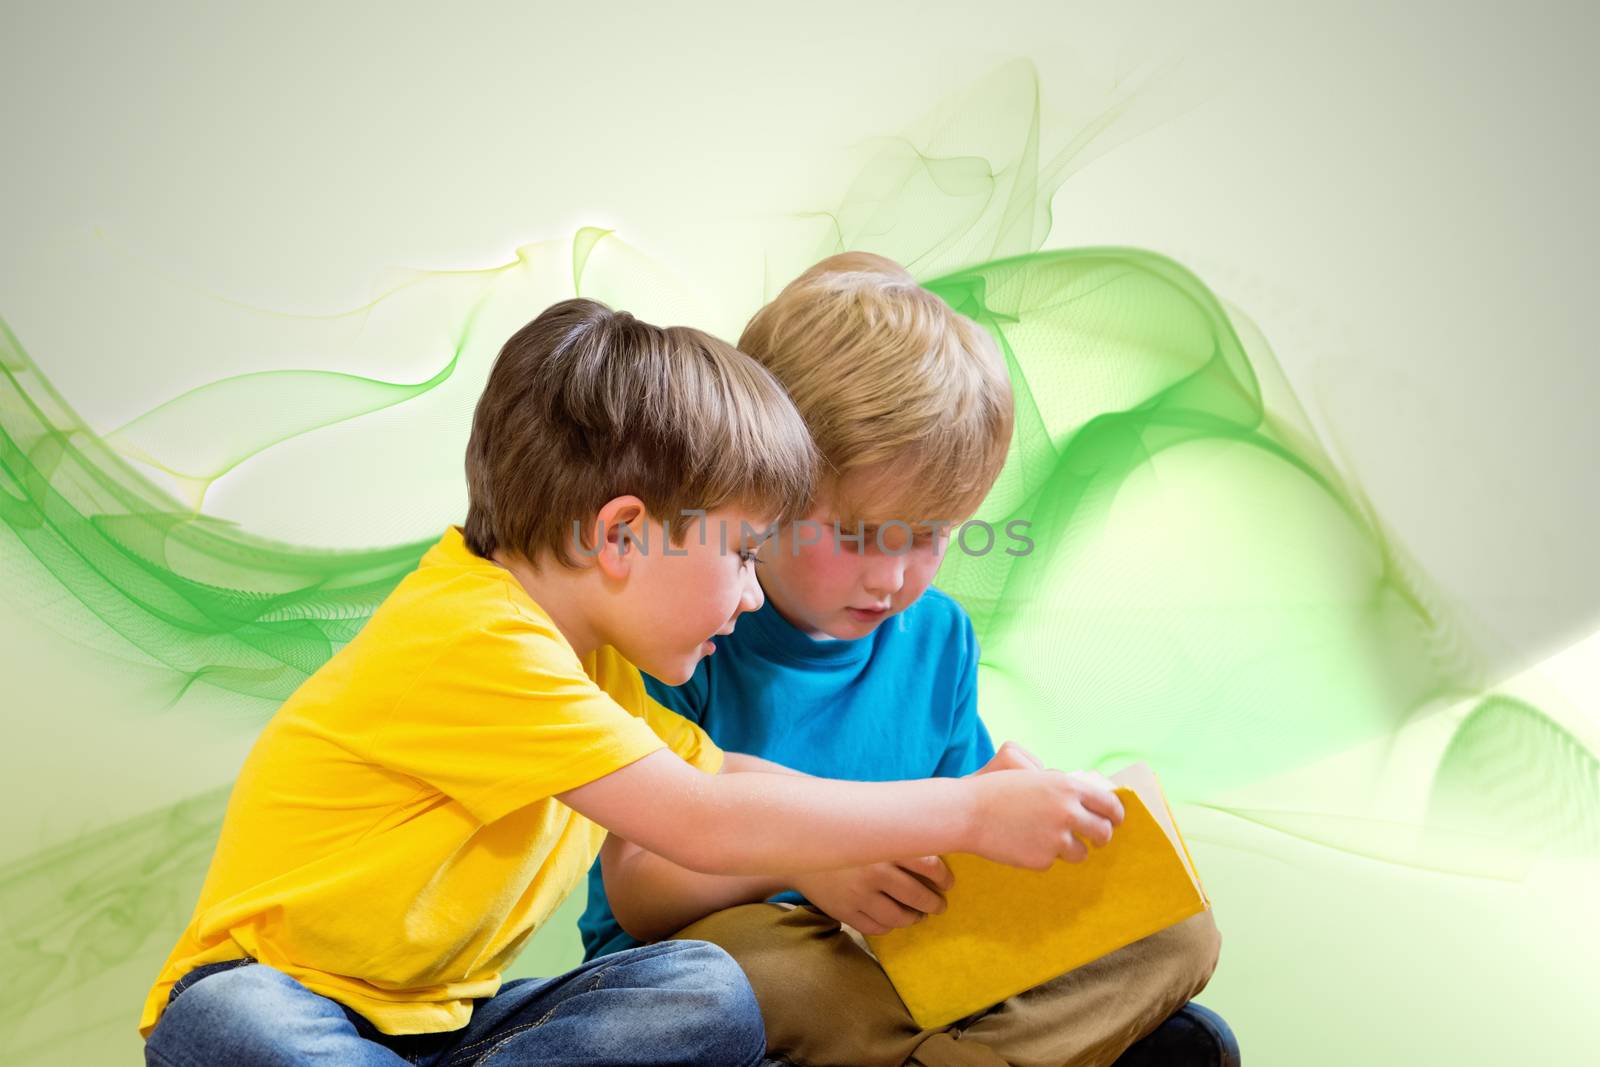 Pupils reading book against green abstract design